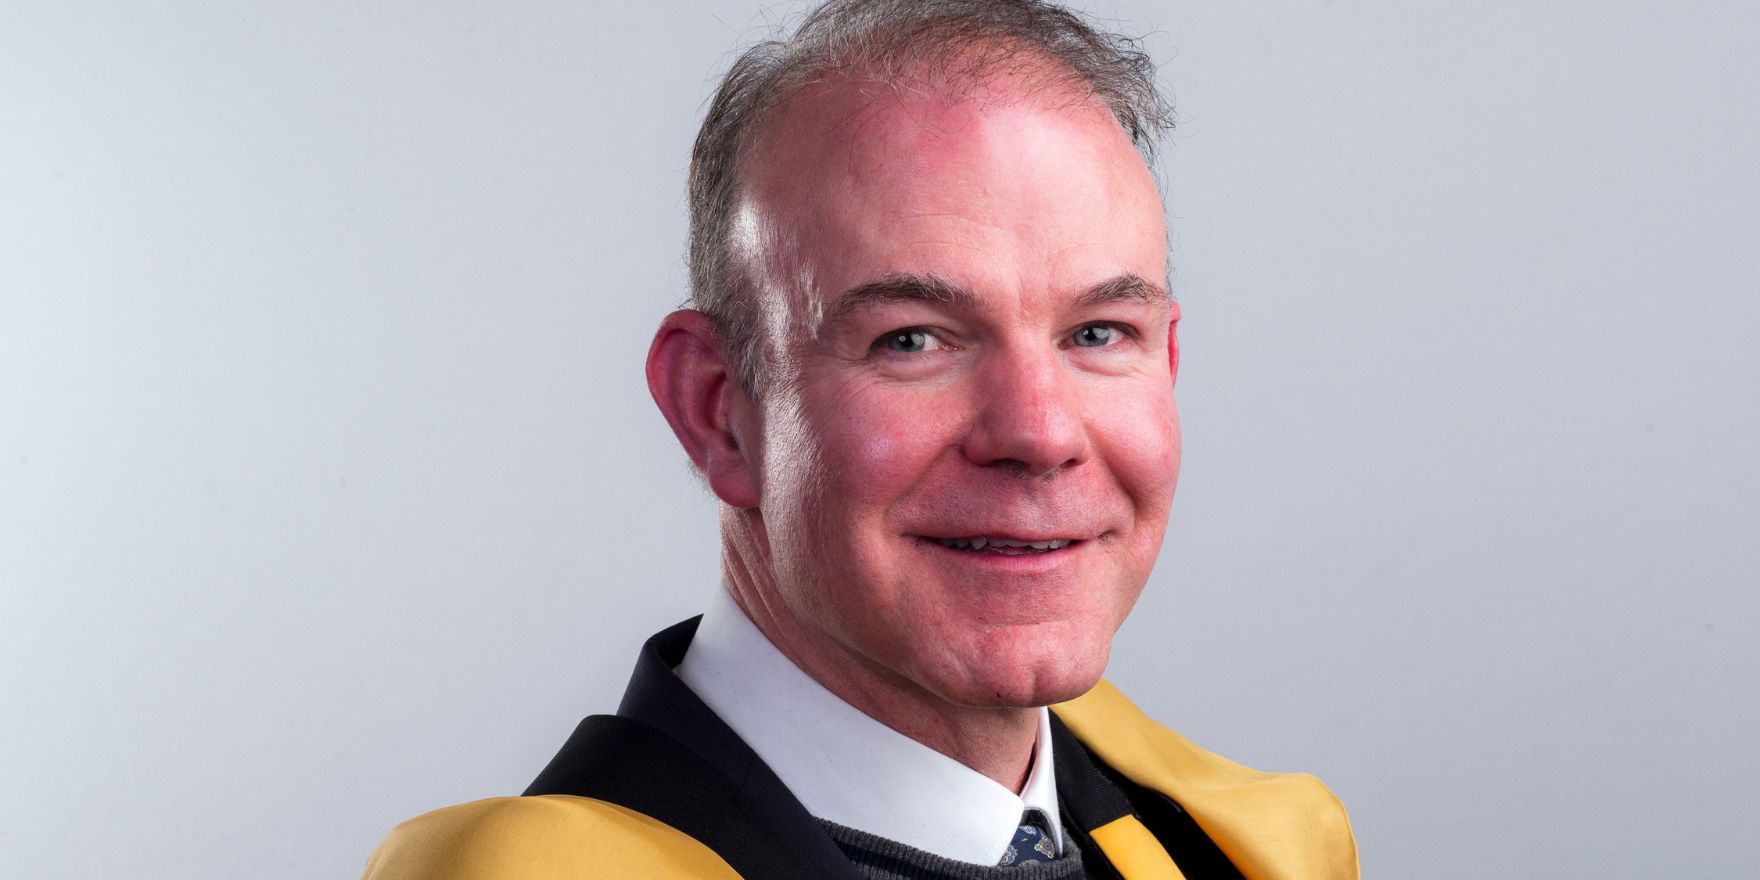 A headshot of a man with grey hair, against a grey background, wearing the yellow and green robes of the Royal Irish Academu